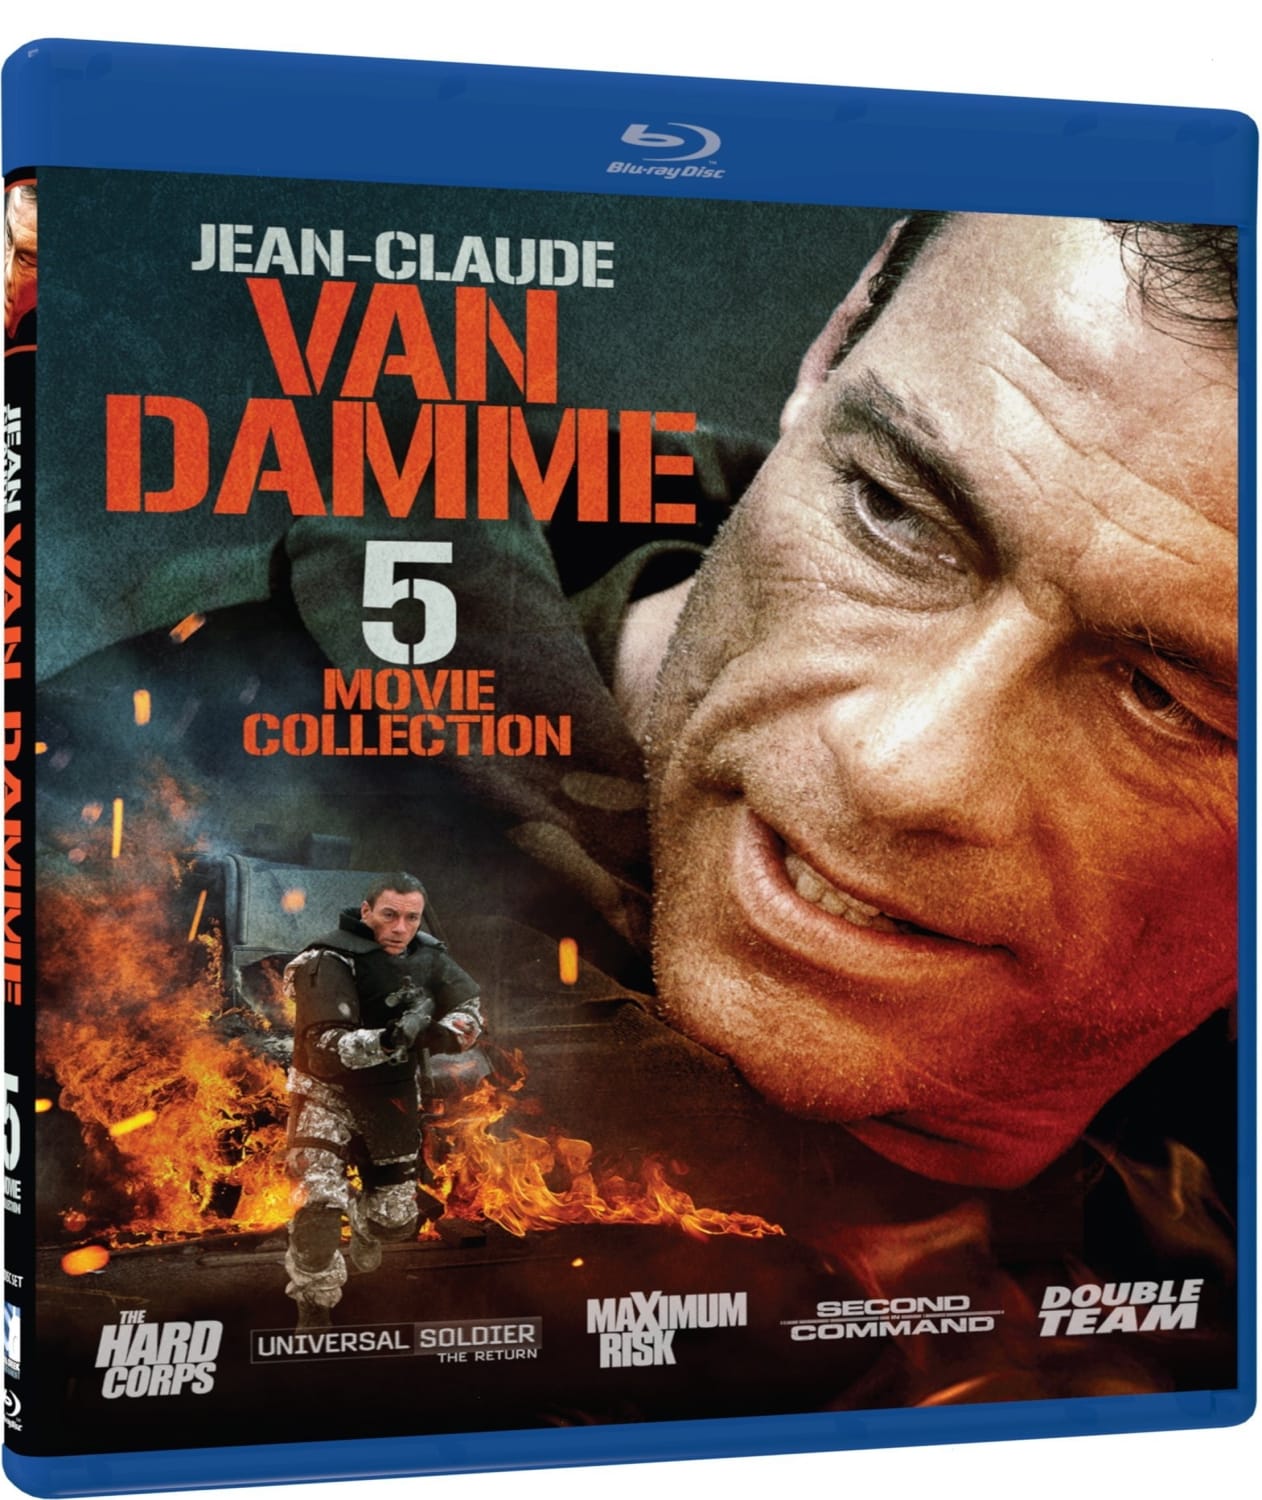 Jean Claude Van Damme – Hard Corps / Double Team / Maximum Risk / Universal Soldier Return / Second In Command (Blu-ray) on MovieShack